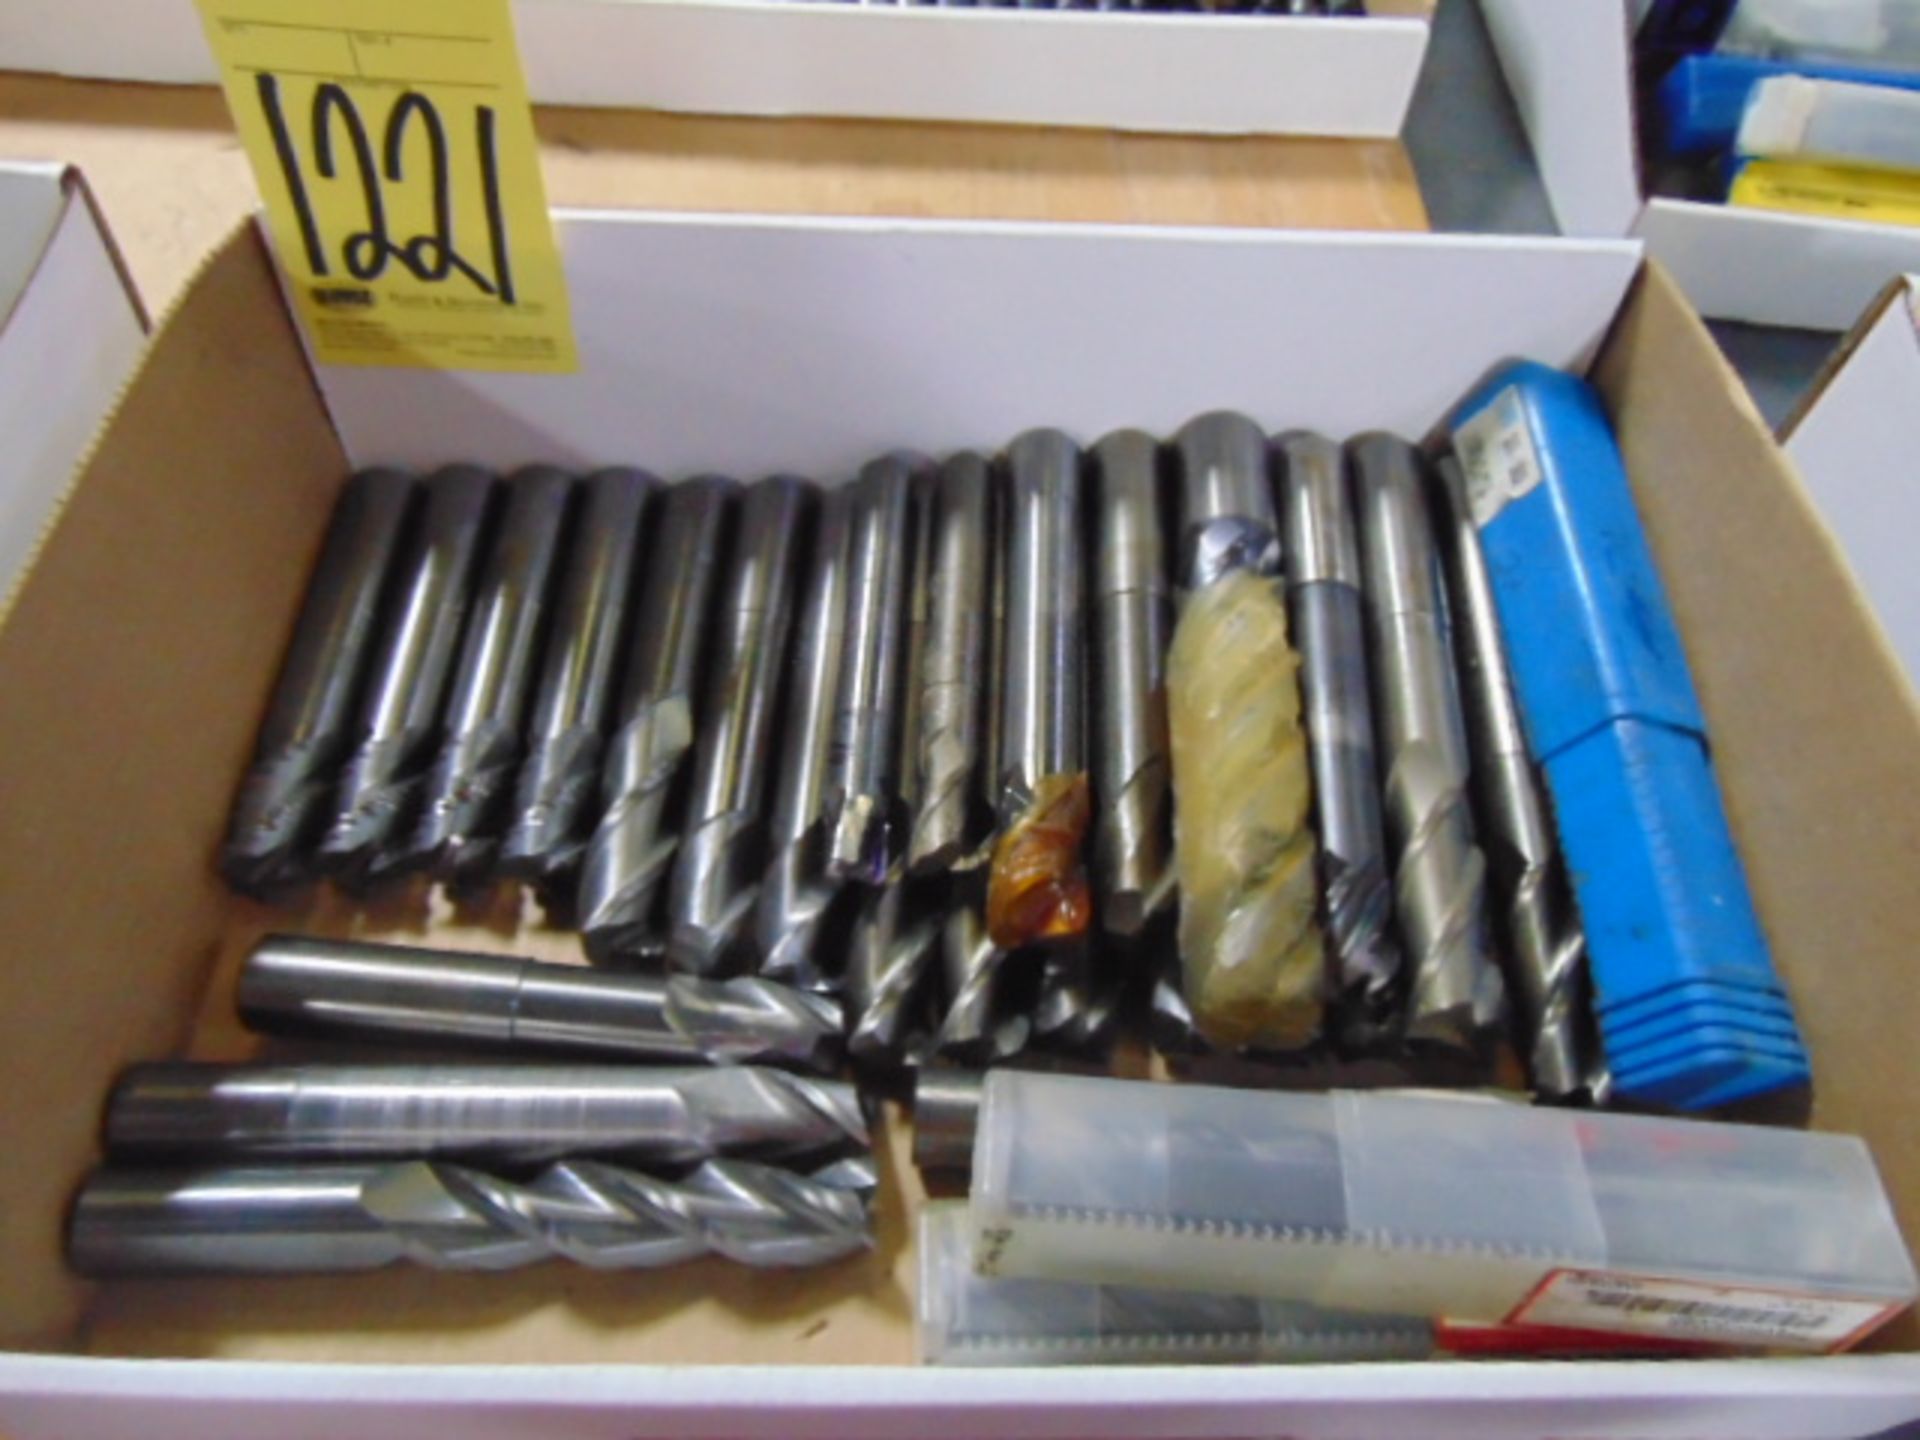 LOT OF SOLID CARBIDE END MILLS, assorted (in one box)